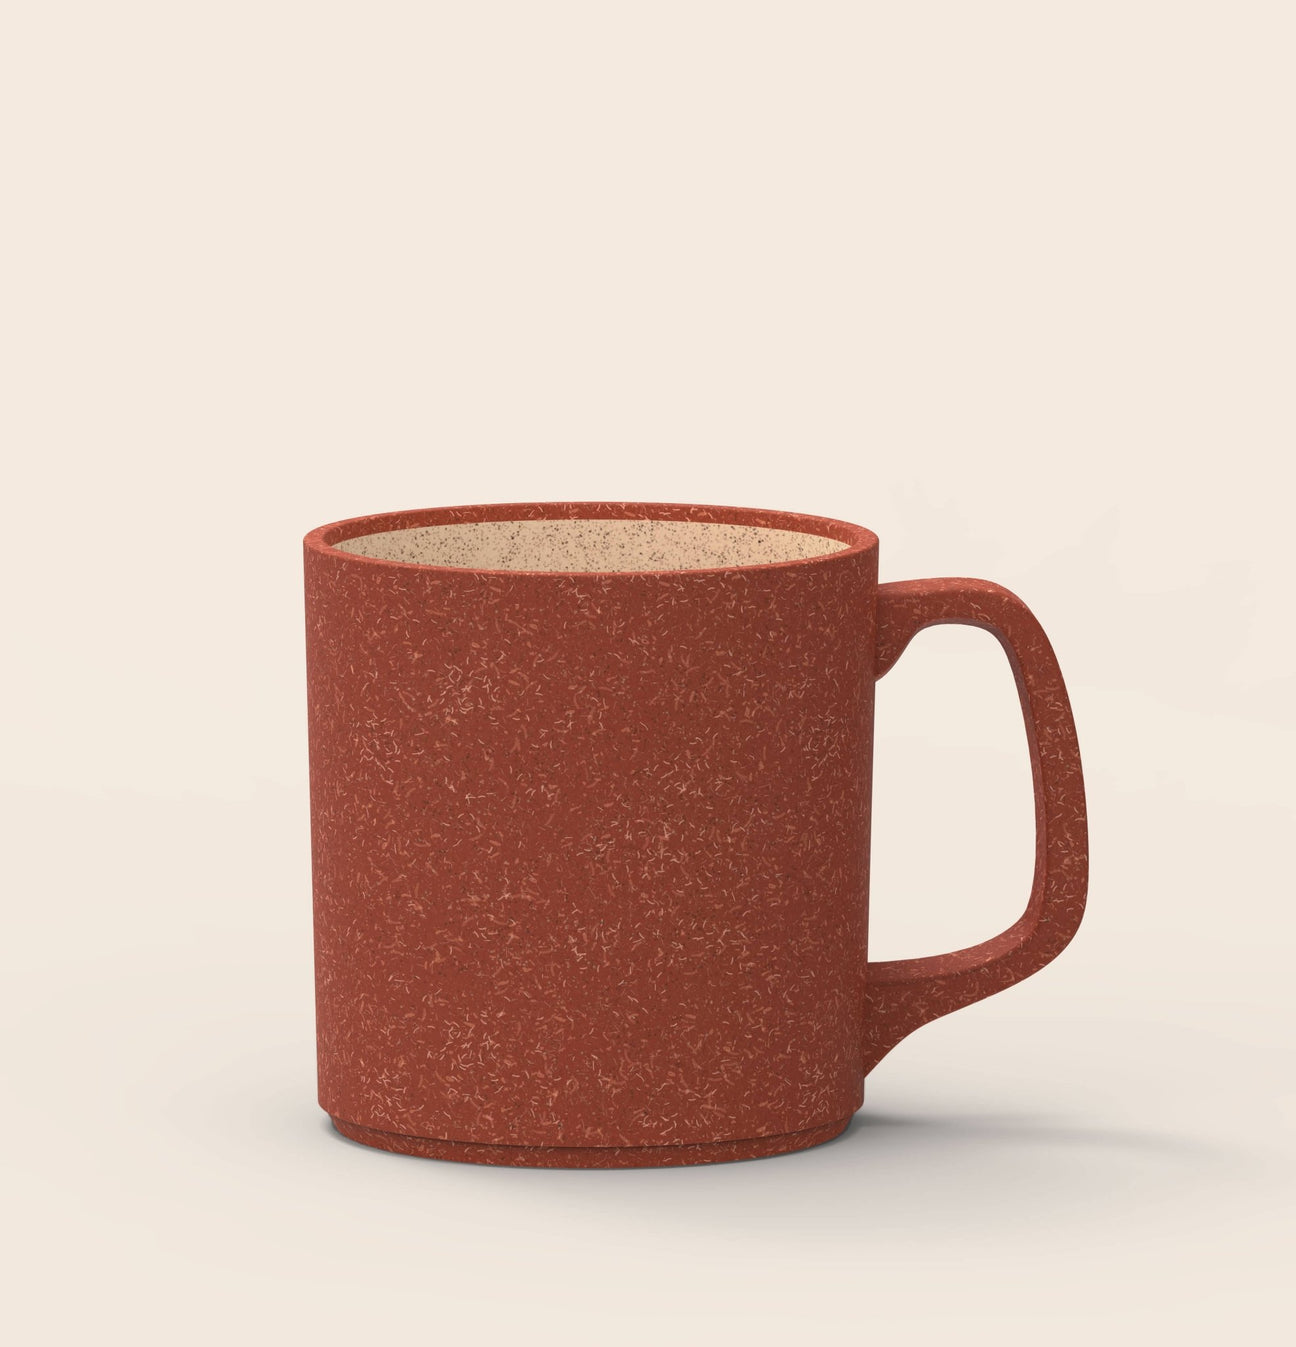 Eco-friendly Natural Fiber Mugs: The Sustainable Choice for Your Morning Brew - MAE